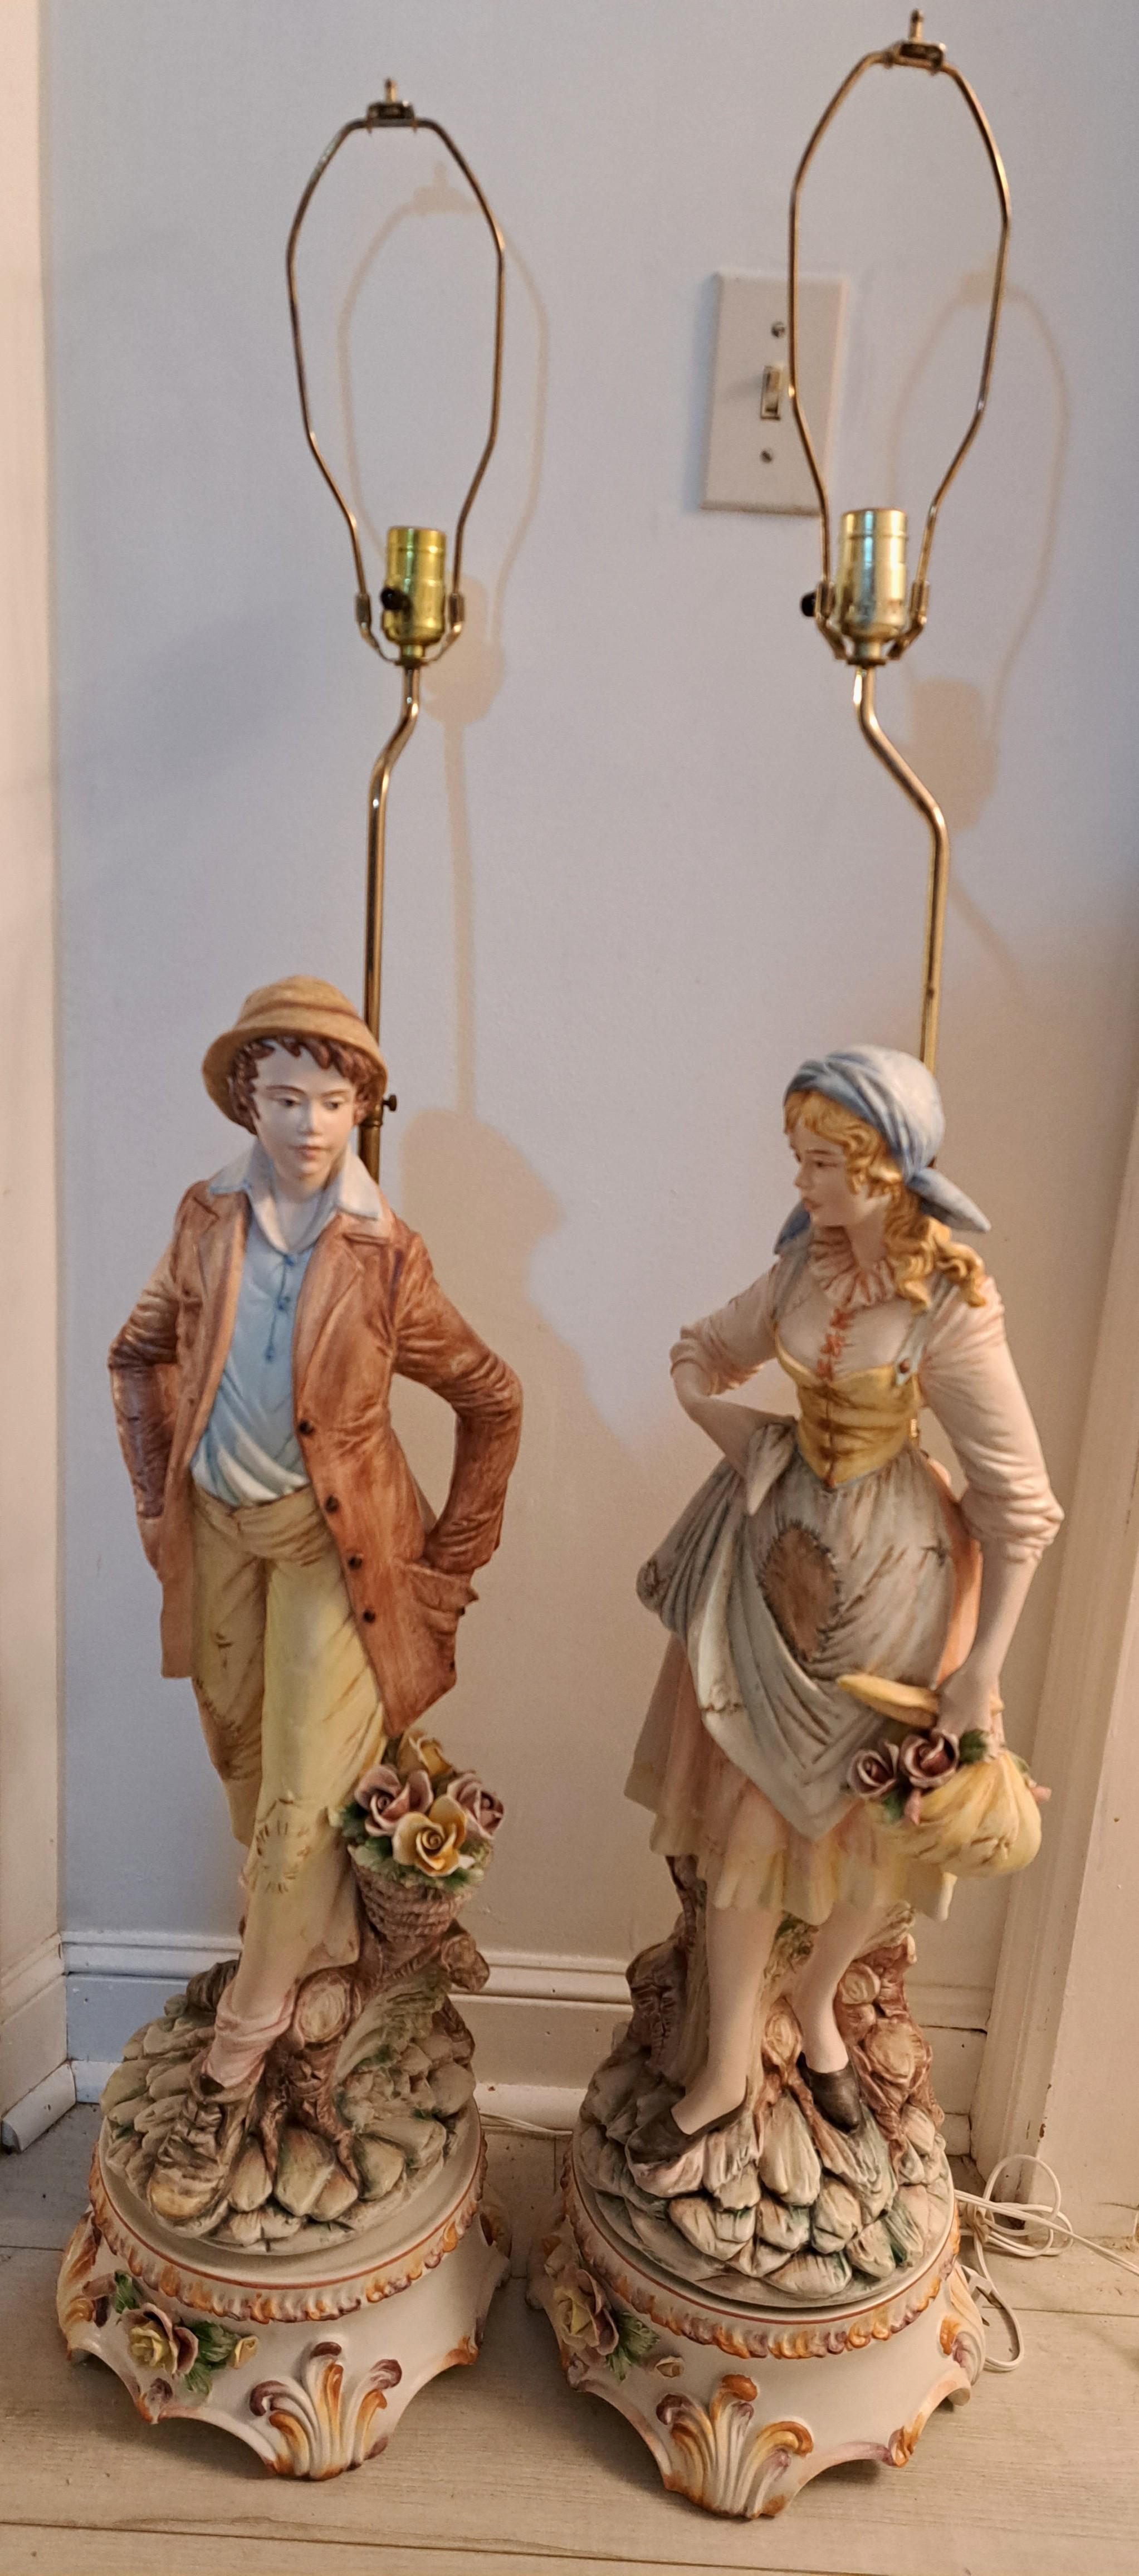 Pair of finely made Capodimonte figural porcelain lamps. Male and female figures of rural girl and boy. Crafted in Italy. Consists of porcelain base section figural section and tall brass lamp fixture with harp. With Capodimonte marks on both bases.